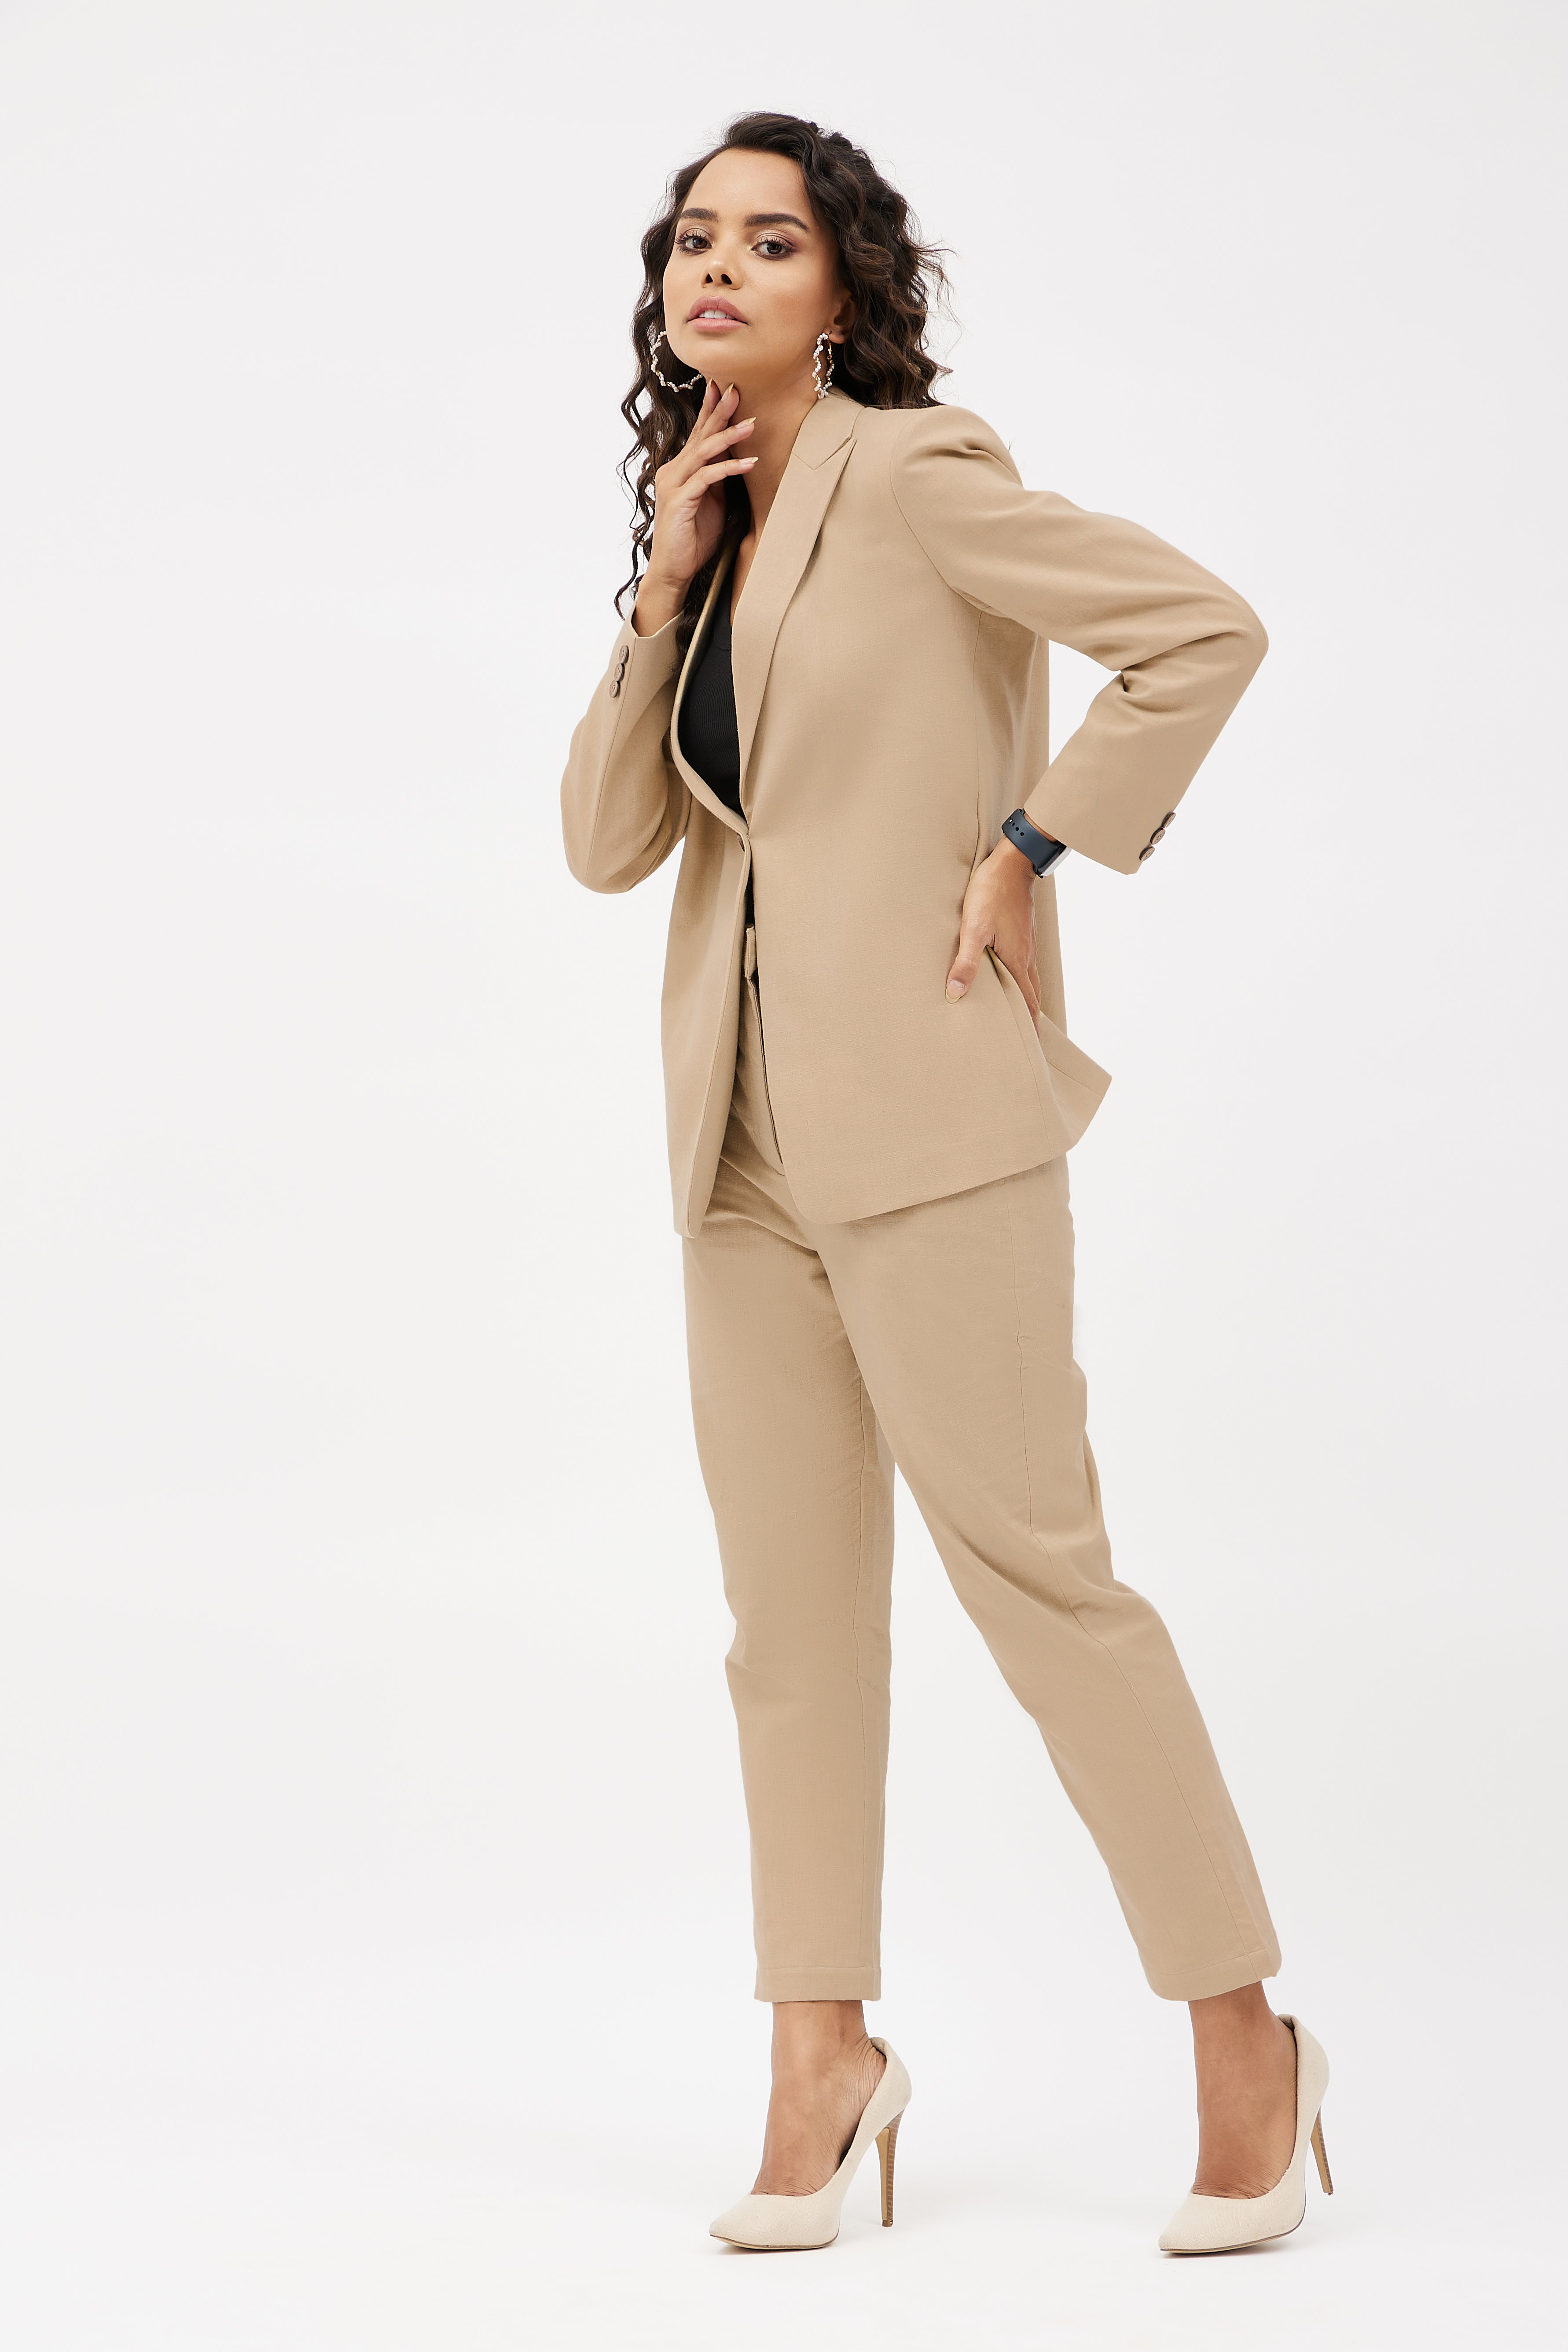 Office Clothes for Women 11 Essentials That Every Work Wardrobe Needs   Vogue